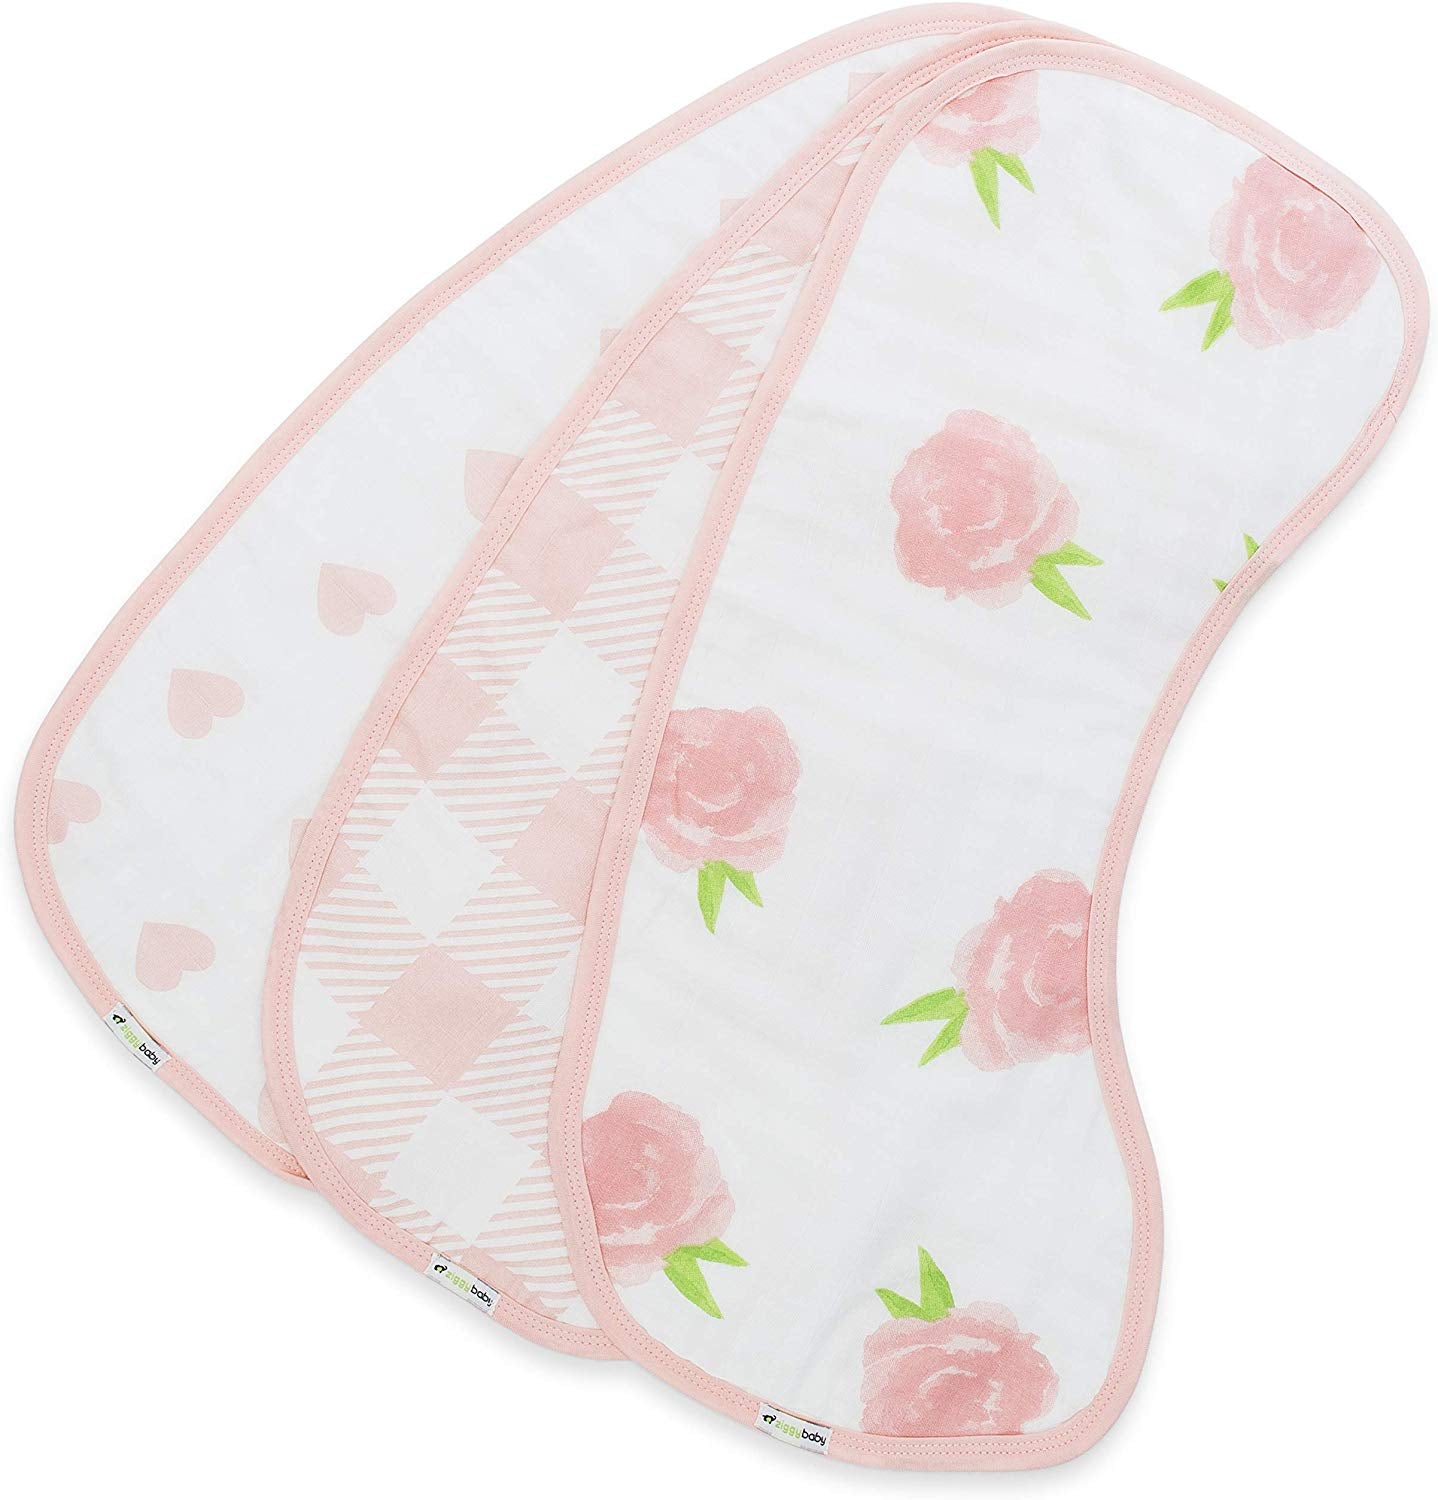  Simple Joys by Carter's Unisex Babies' Muslin burp cloths, Pack  of 7, Pink/White, One Size : Baby